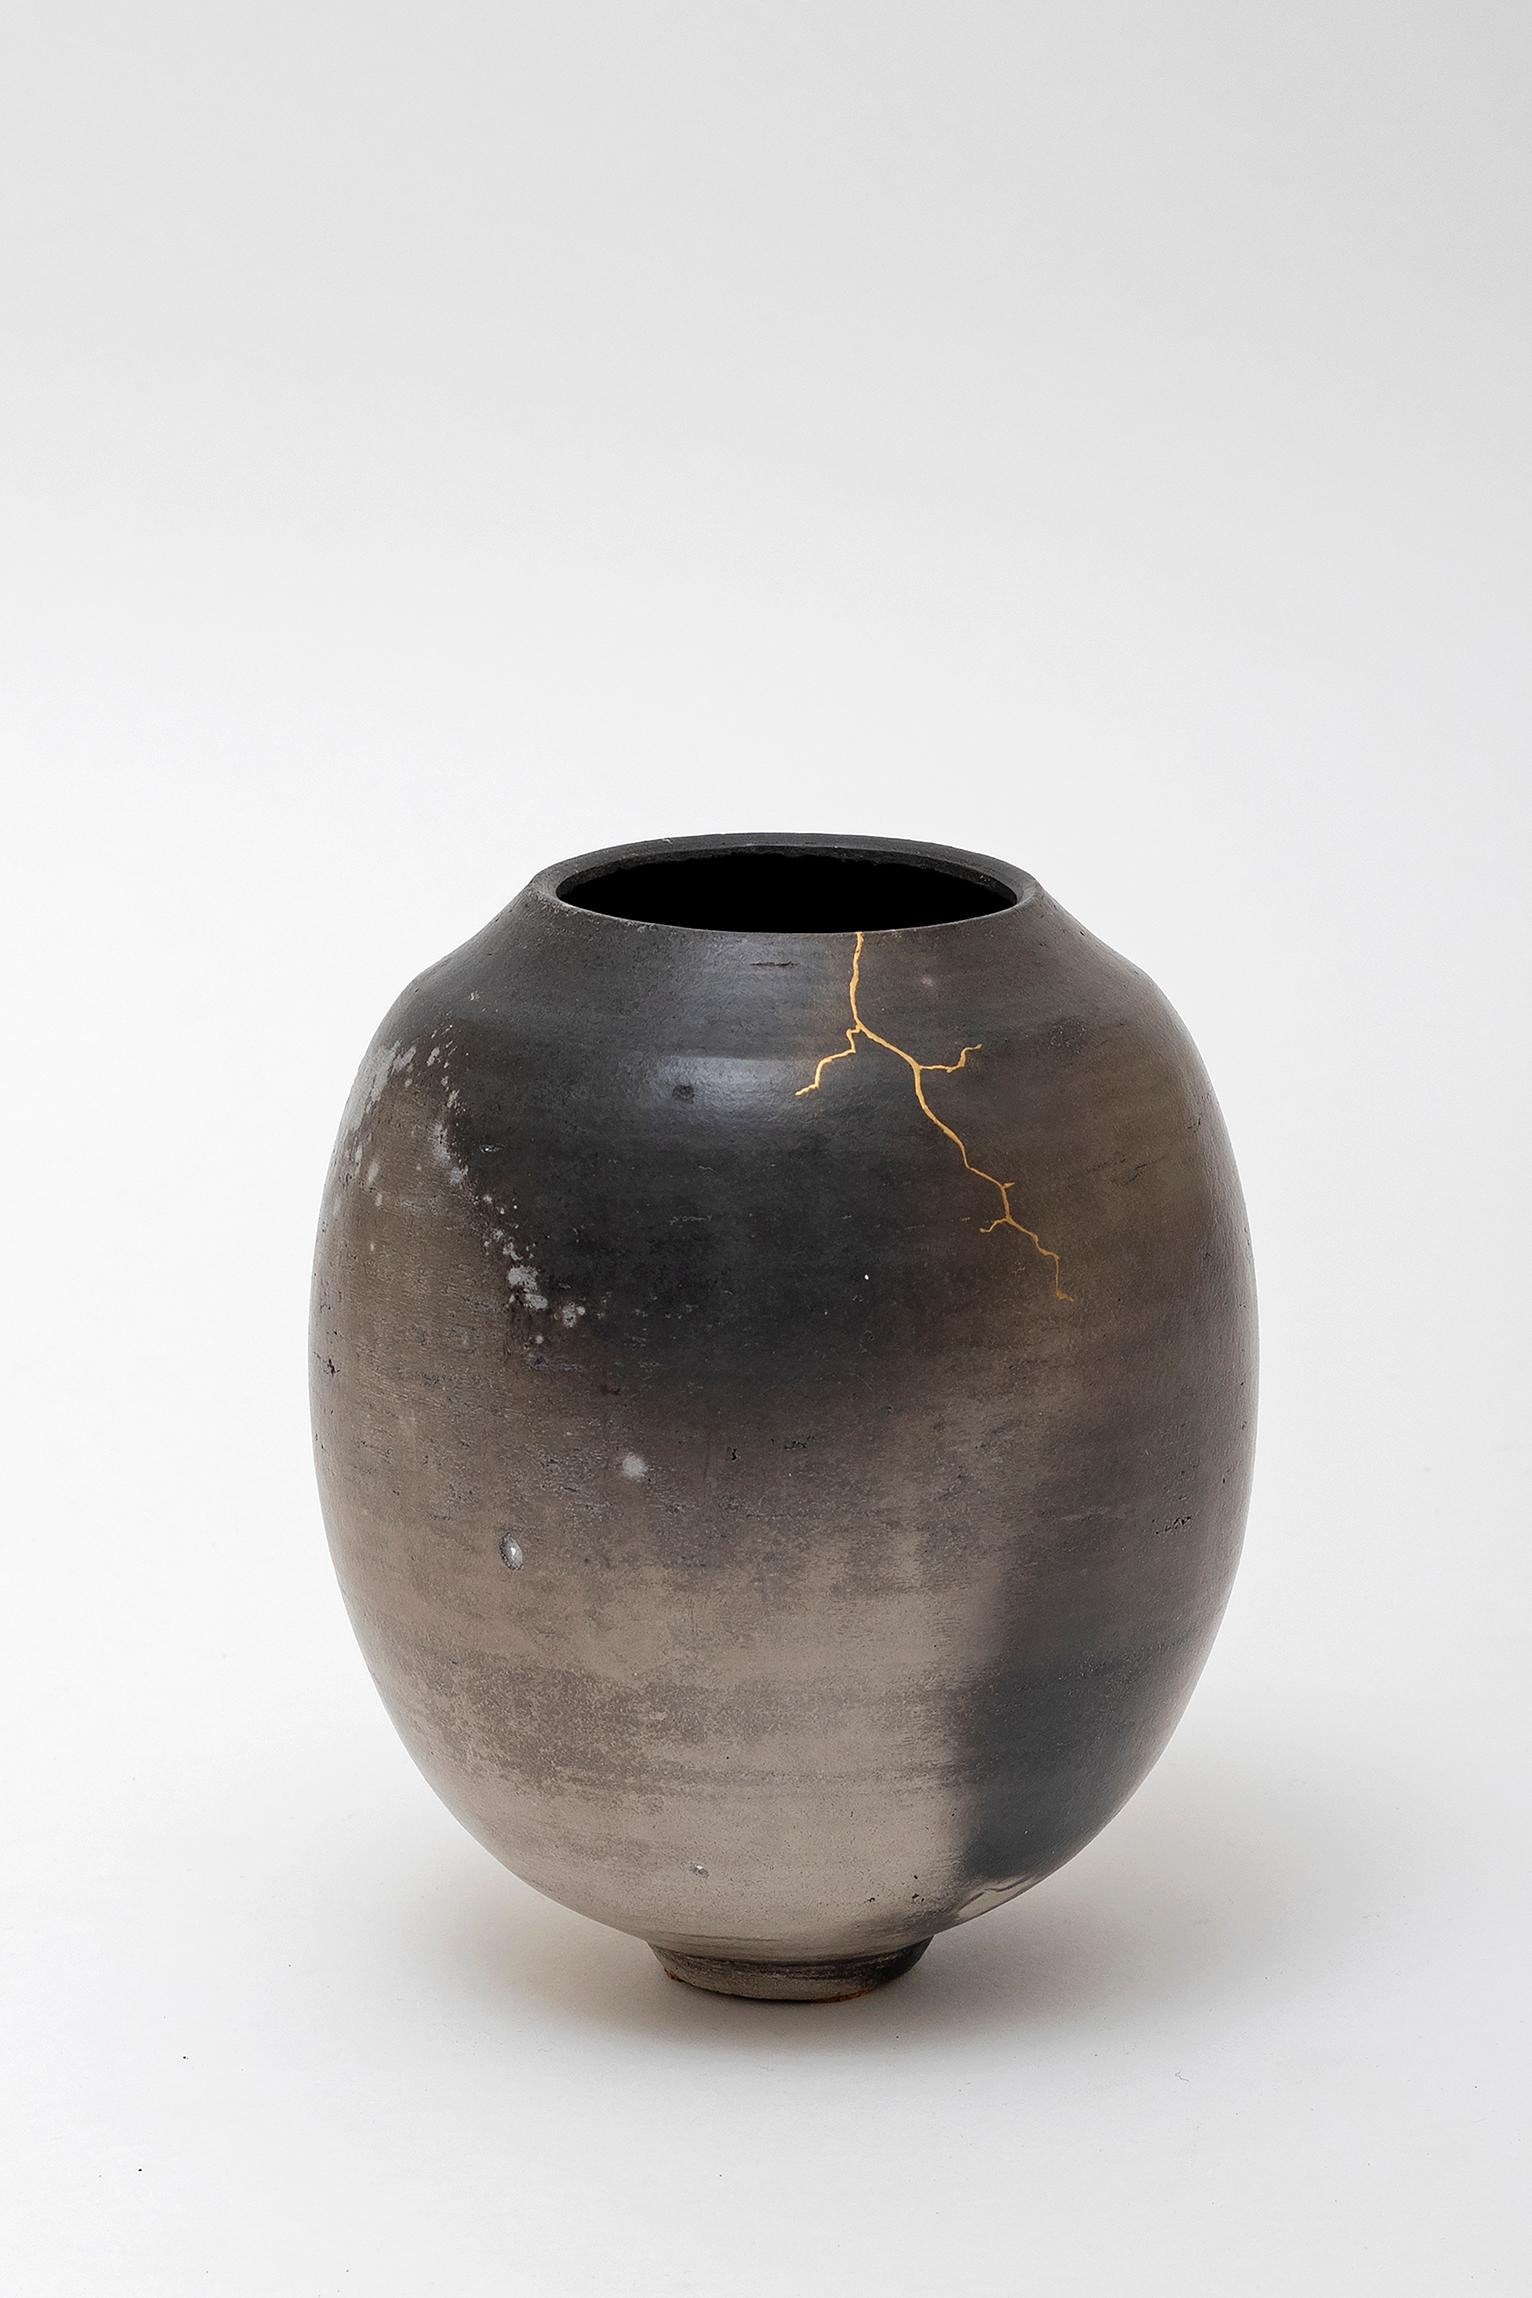 A vase by Karen Swami, 2018.
A unique wheel thrown stoneware, smoke fired, waxed and reworked with Japanese vegetal 'Urushi' lacquer and pure gold, in the Kintsugi technique.
Pièce unique / one of a kind - Porous and non